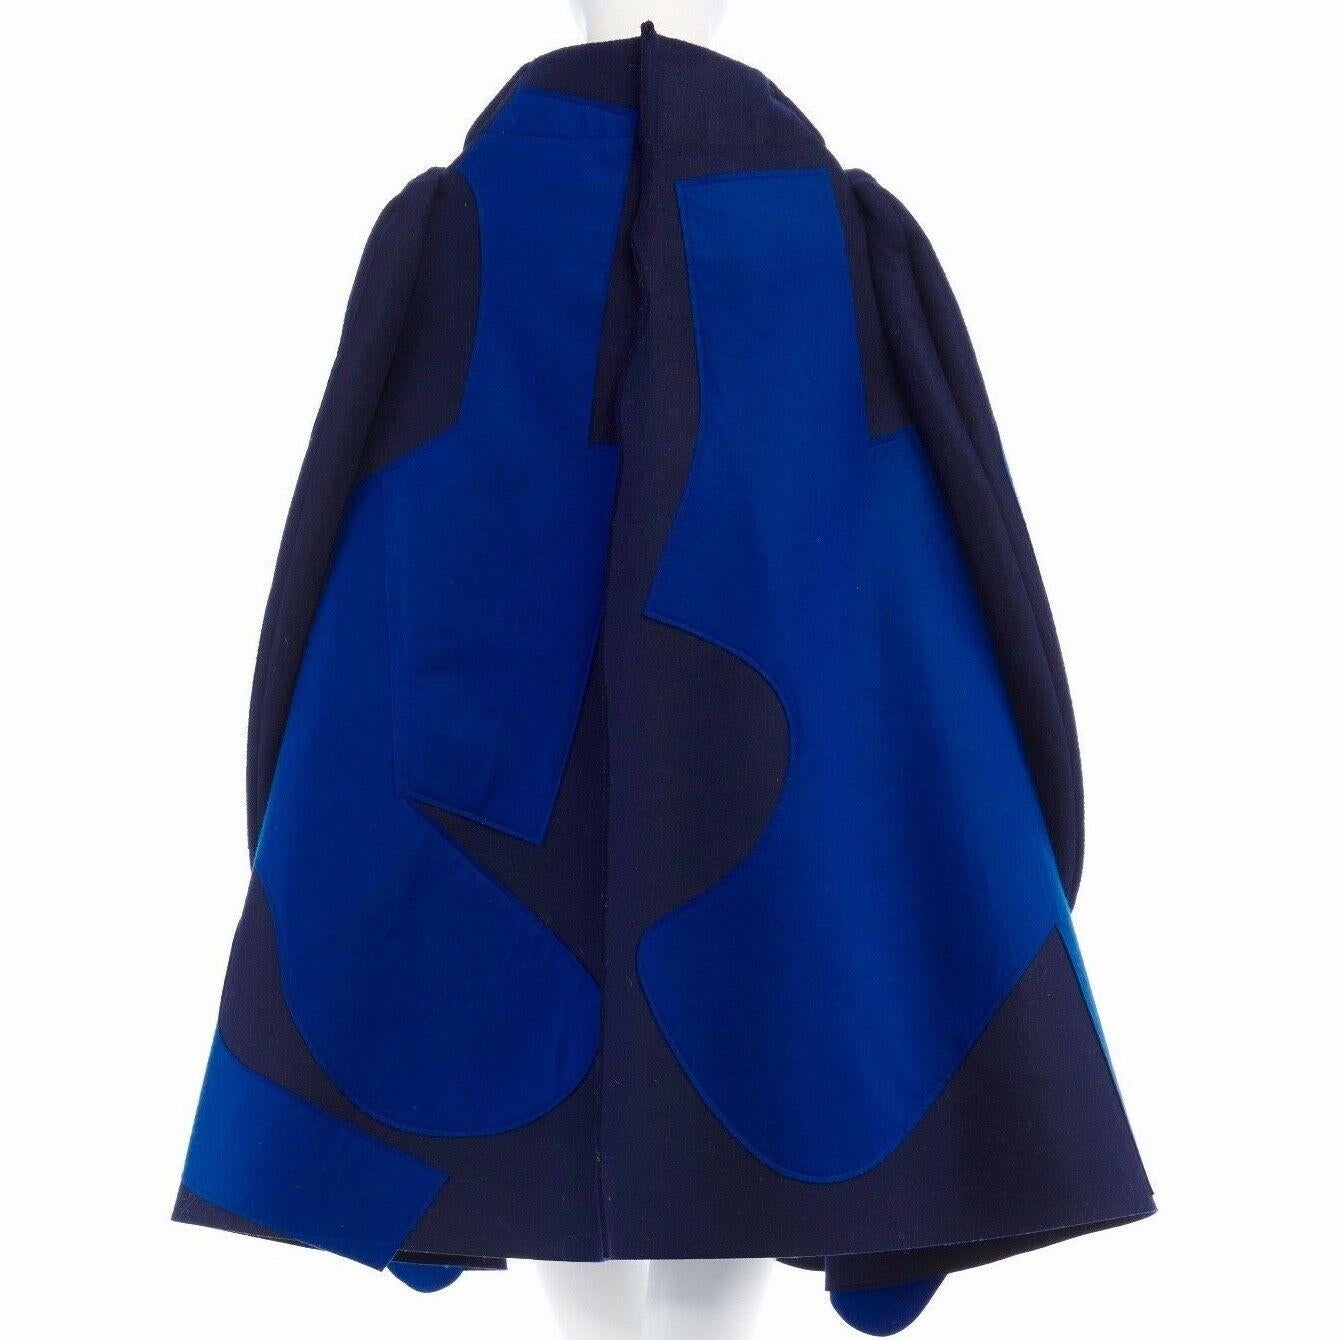 new COMME DES GARCONS AD2012 flatpacked 2D blue abstract shape wool felt coat XS 1